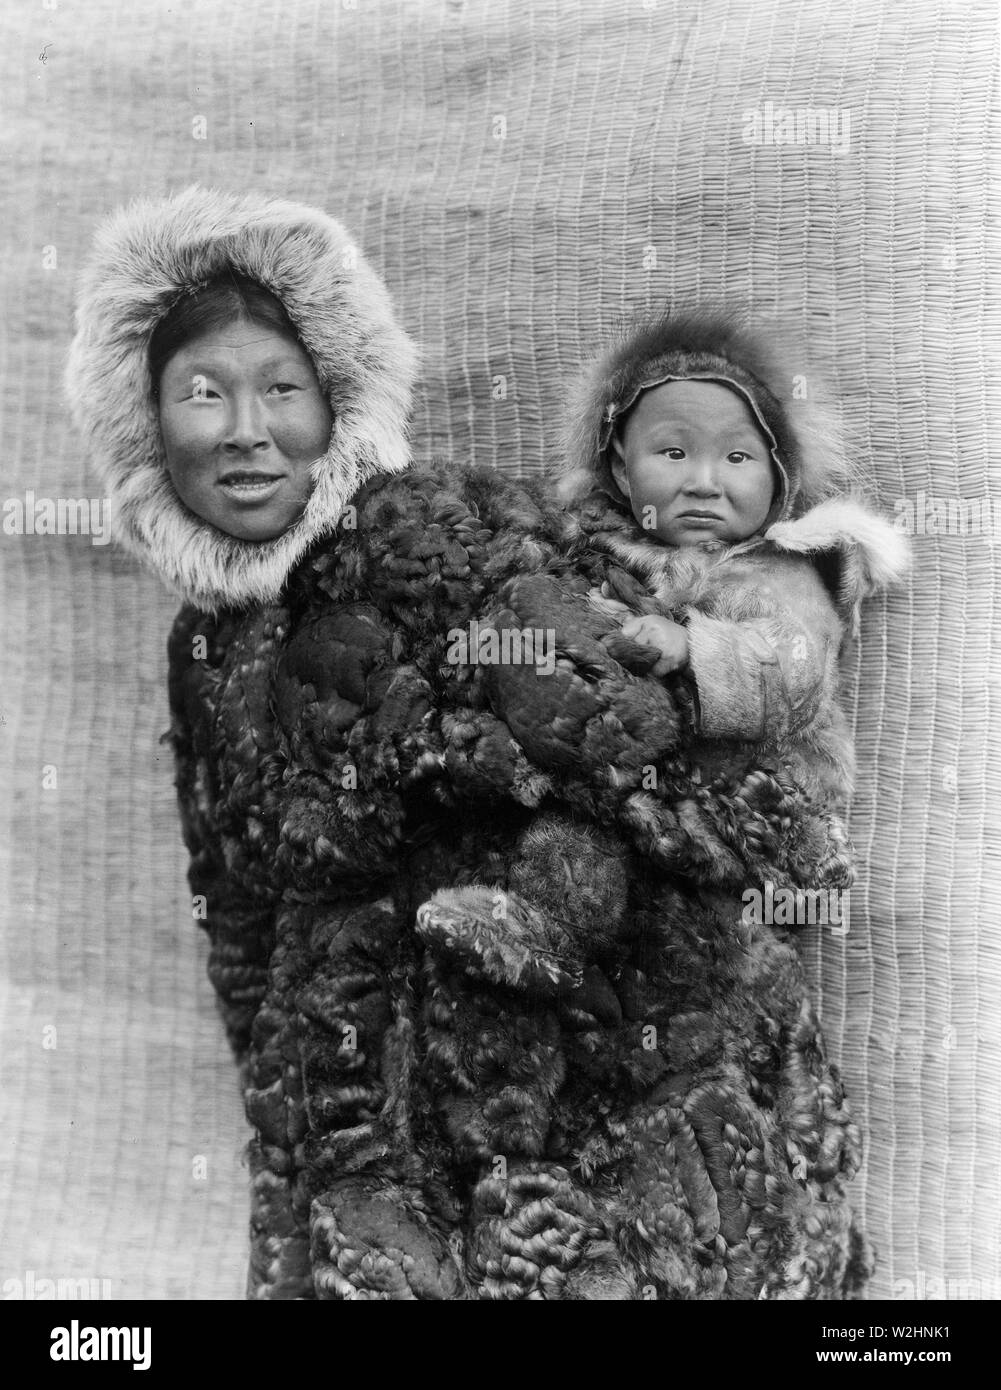 Native america child Black and White Stock Photos & Images - Alamy